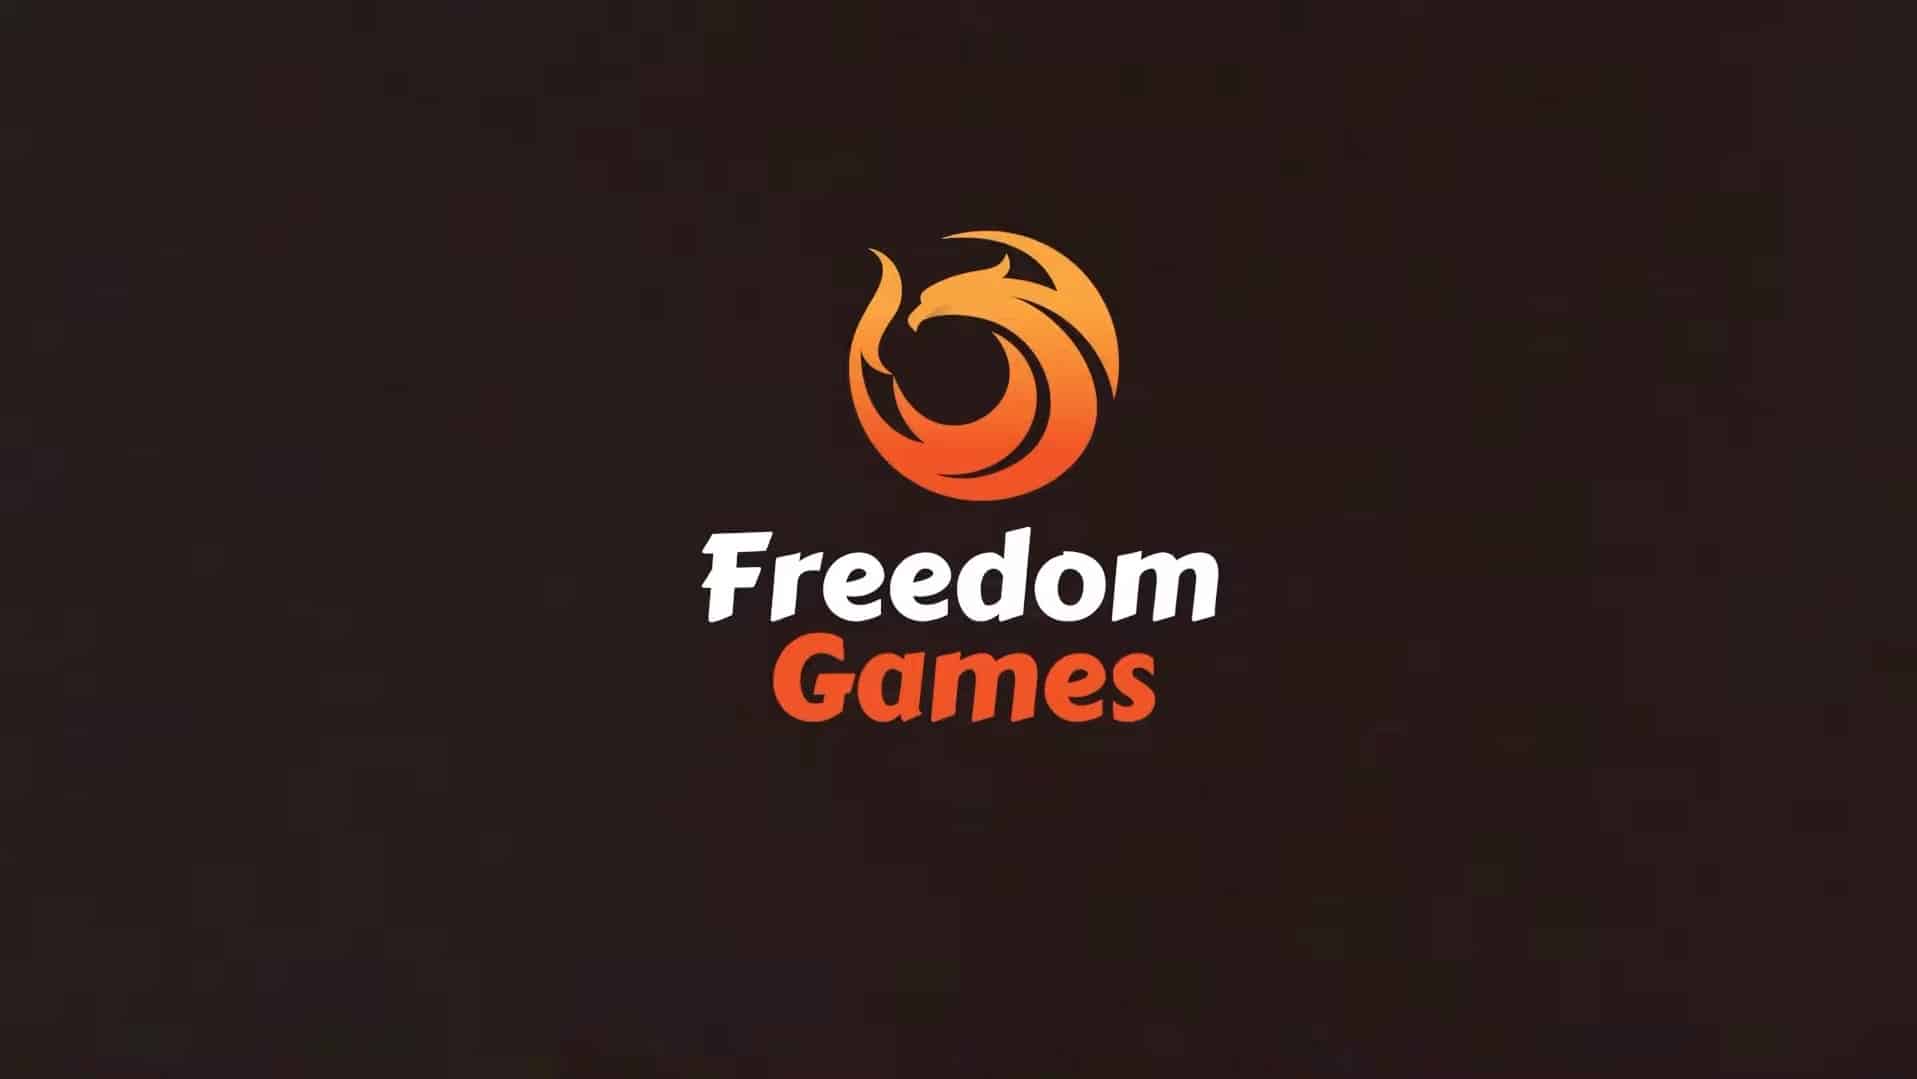 earn your freedom game patreon